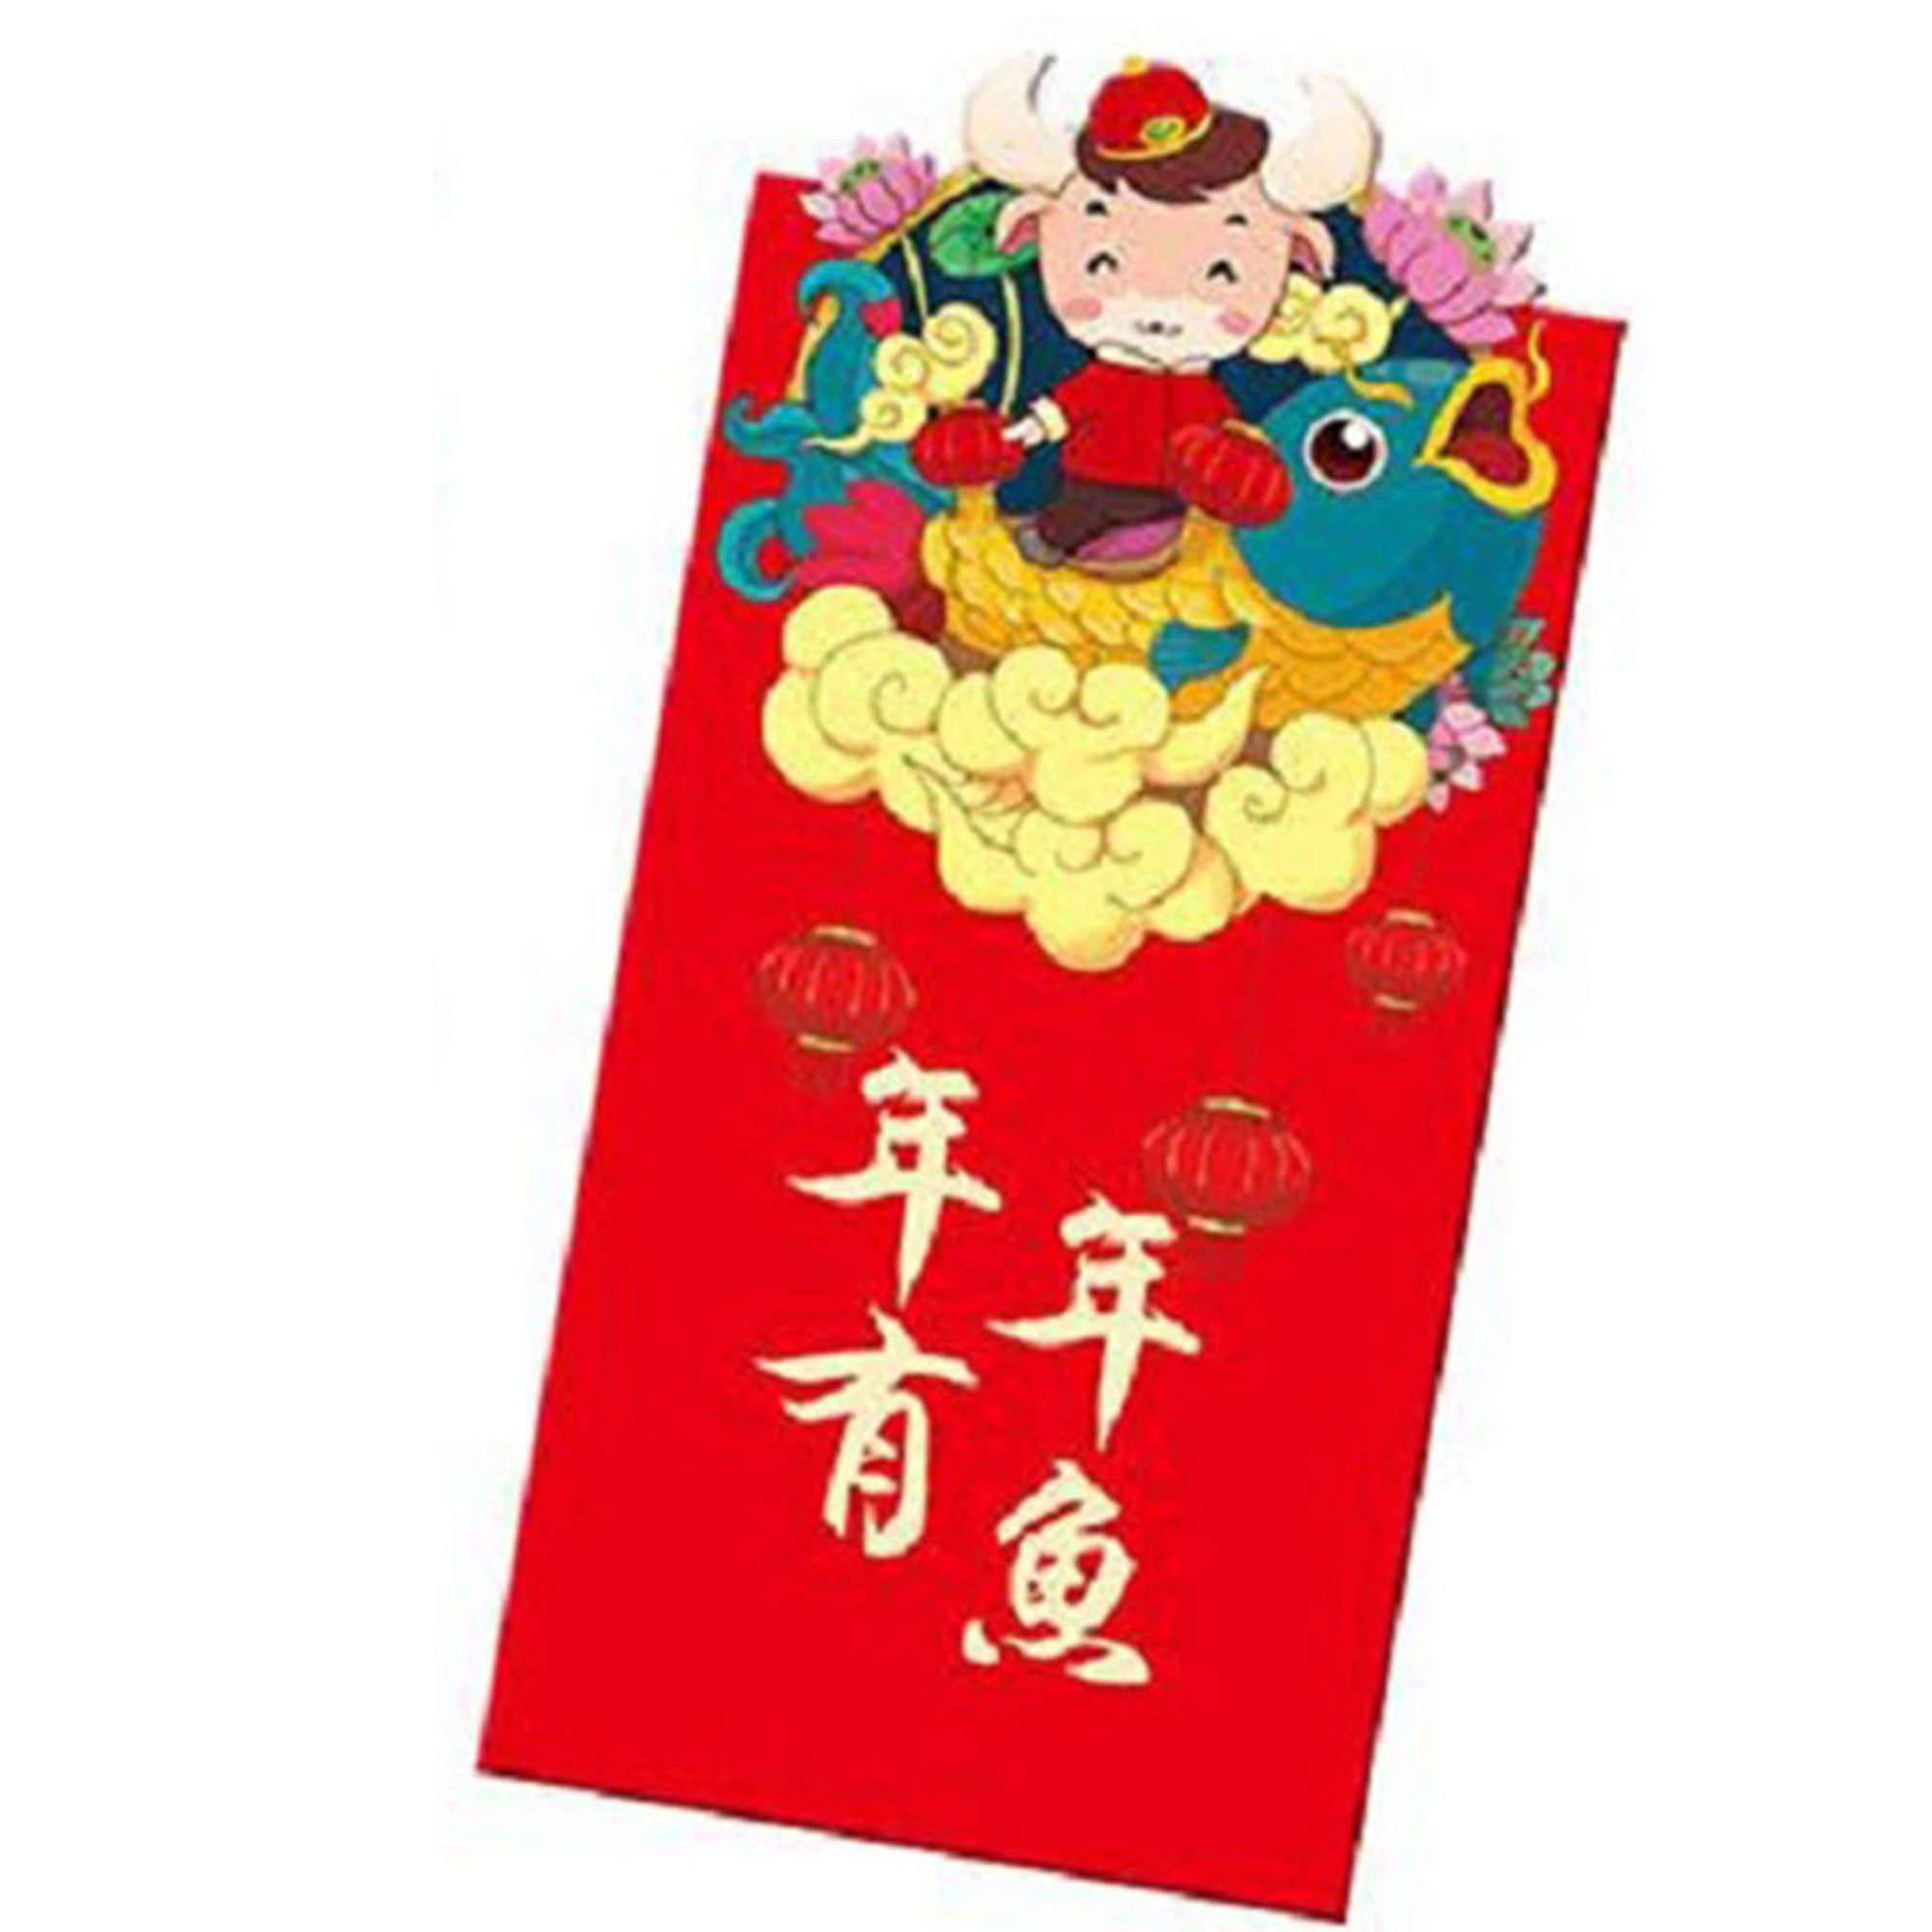  Ciieeo 24pcs 2021 Year of the Ox lucky red envelope Ox Year Red  Pockets Chinese New Year Red Envelopes decorative envelopes pocket wallet  year of the ox chinese wedding envelopes